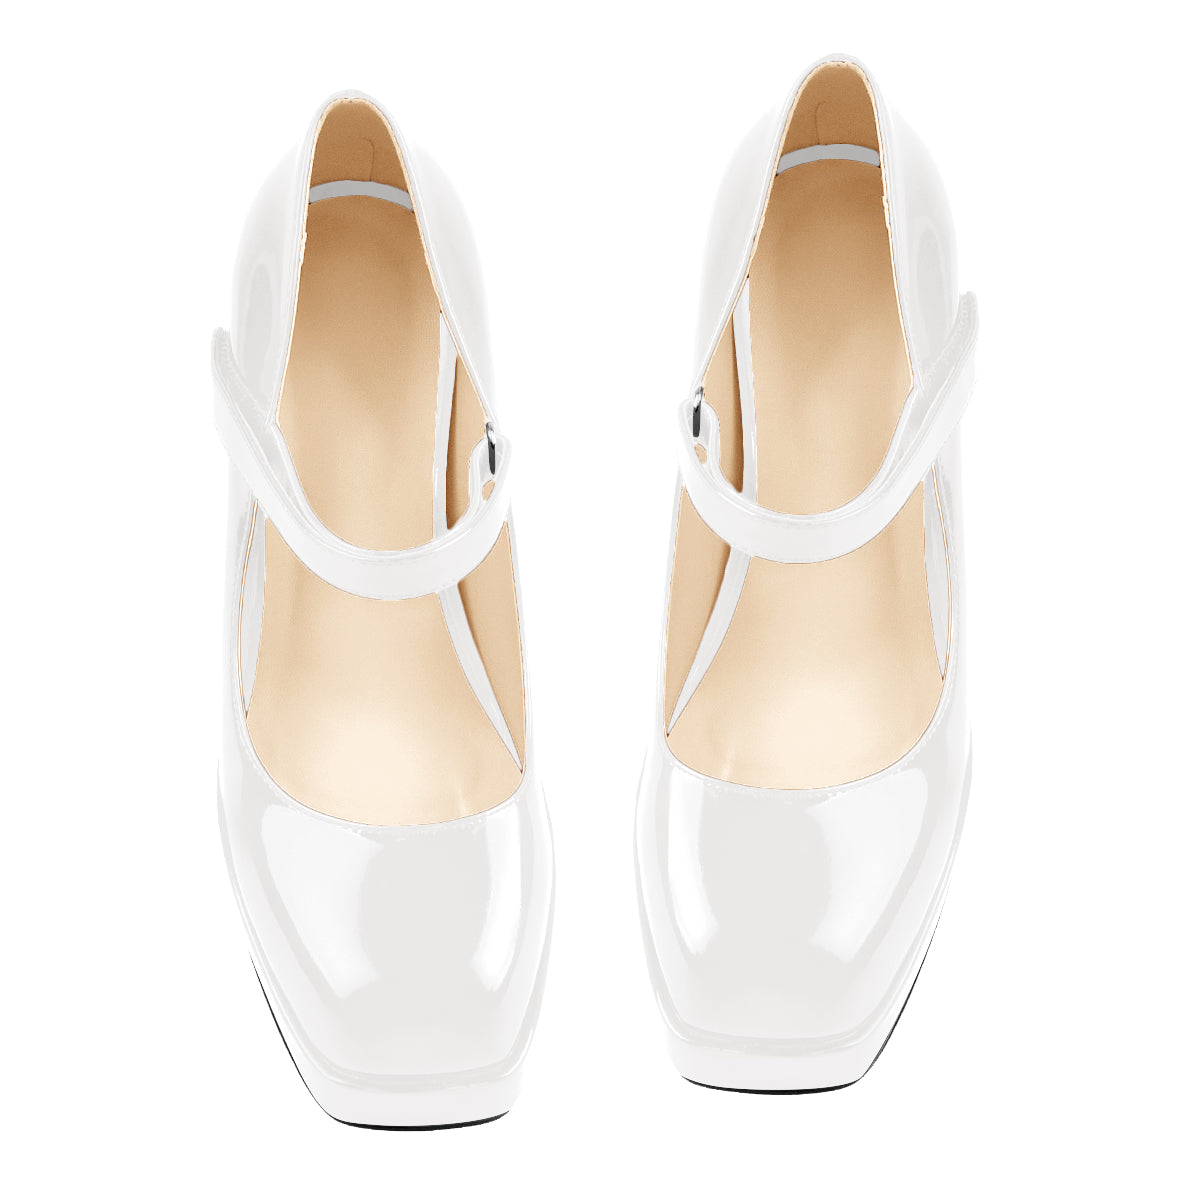 Maison Margiela Tabi Leather Mary Jane Pumps in White | Lyst